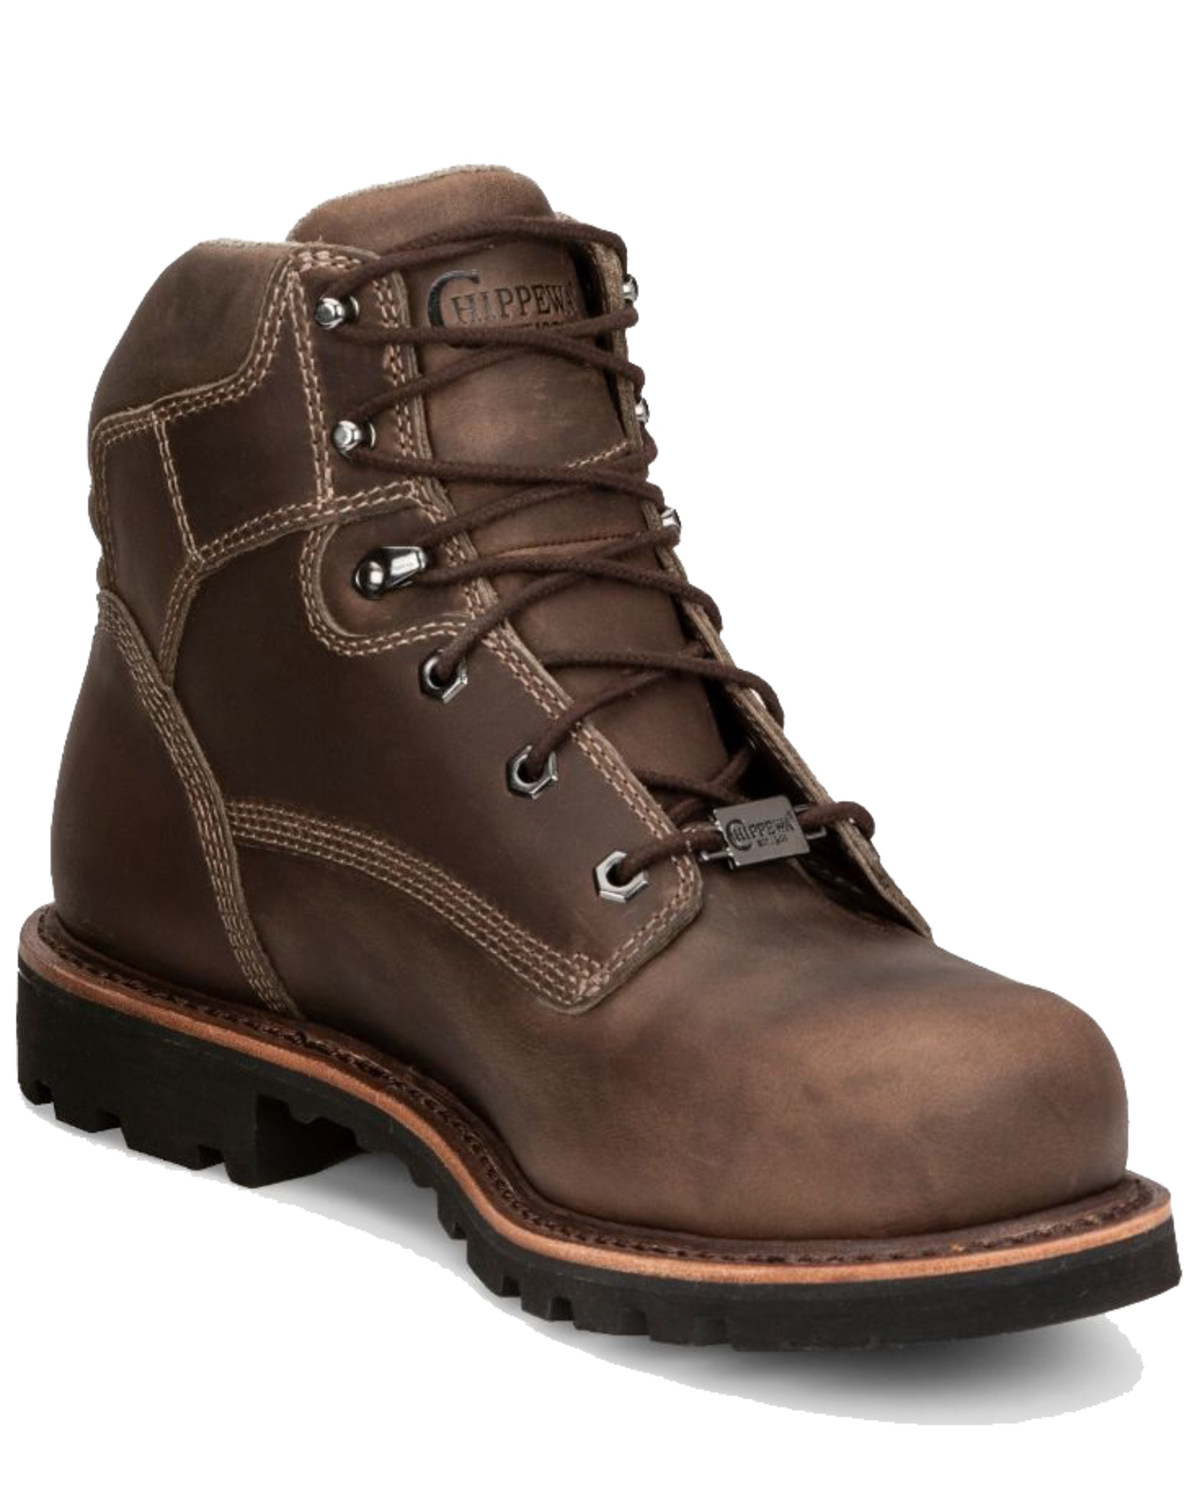 Chippewa Men's Bolville Fossil Work Boots - Composite Toe